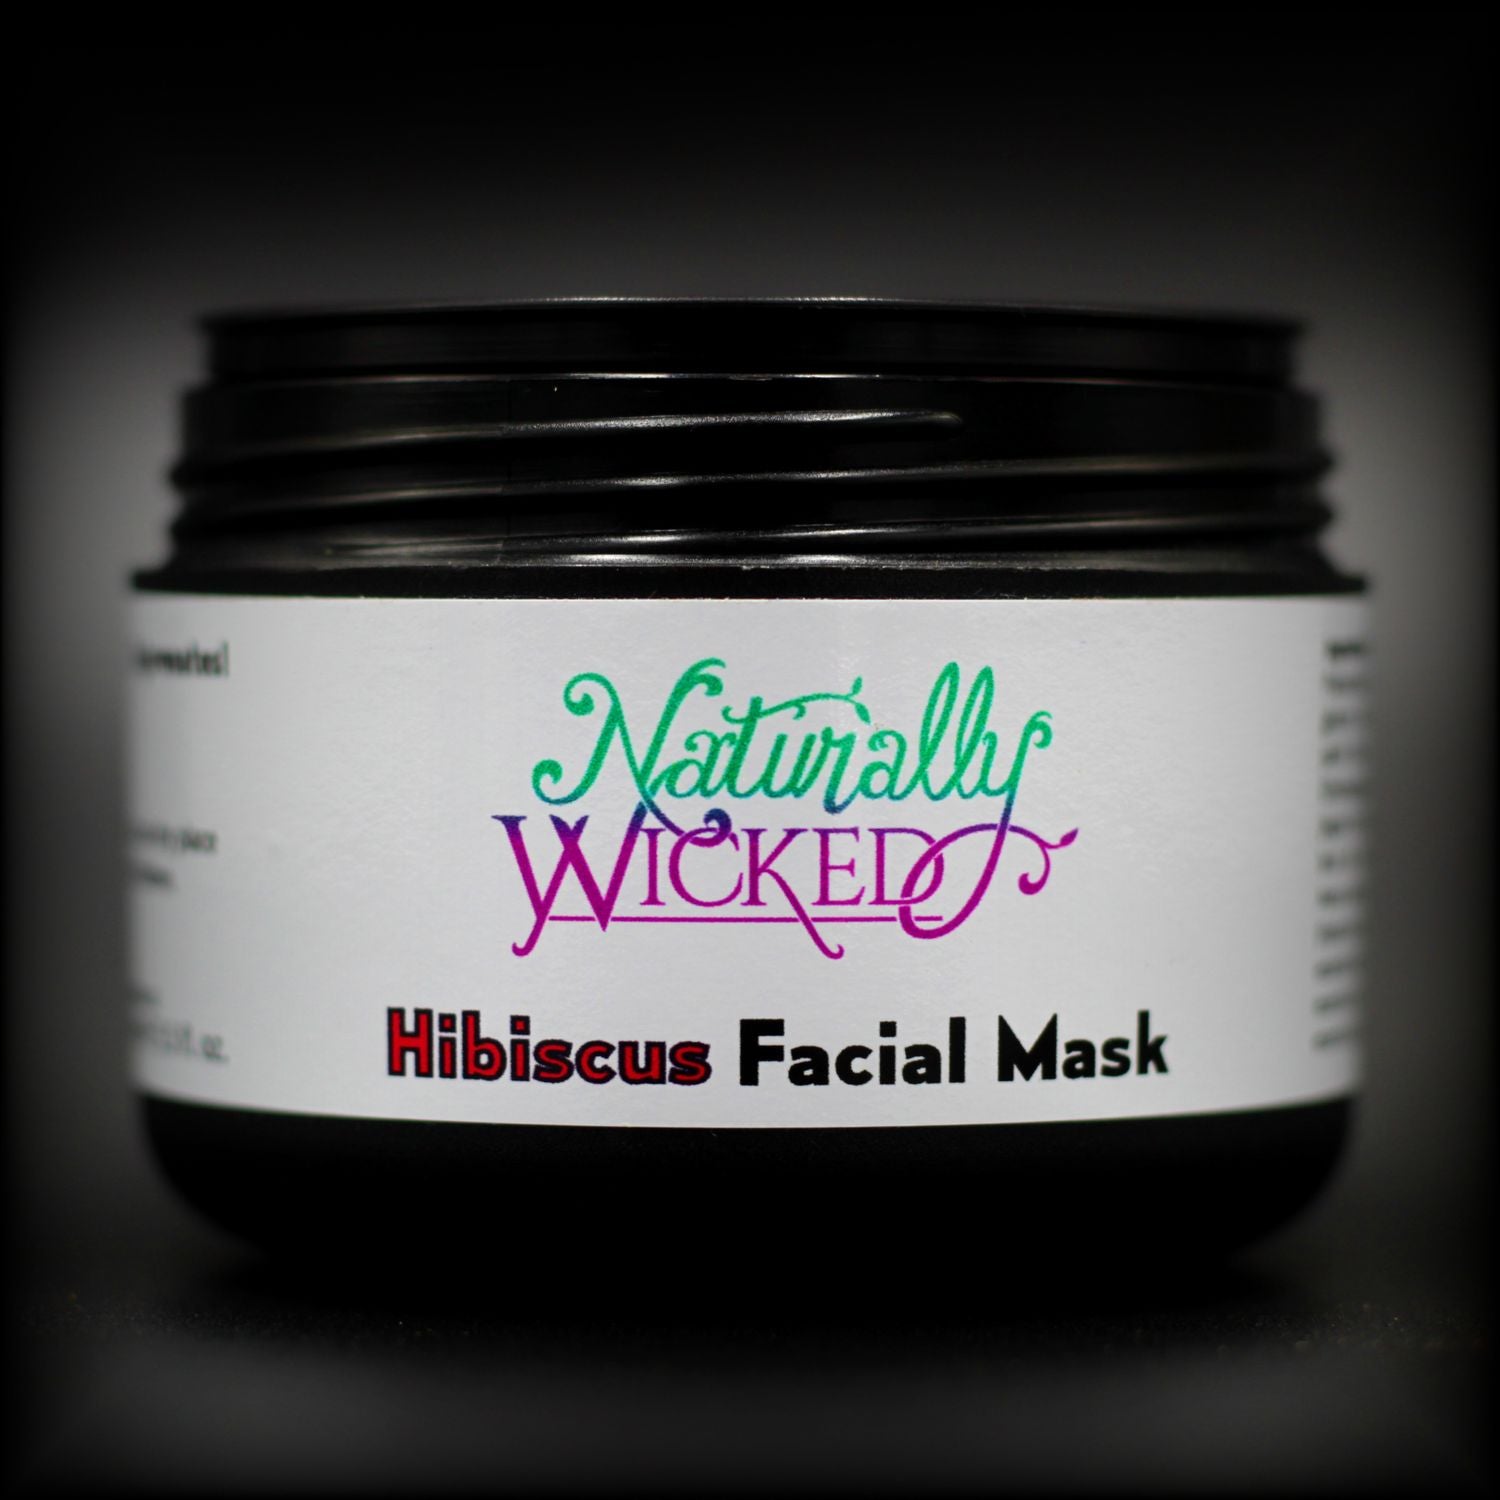 Naturally Wicked Hibiscus Facial Mask Container, Seal & Luxury Screw Connection With Lid Off